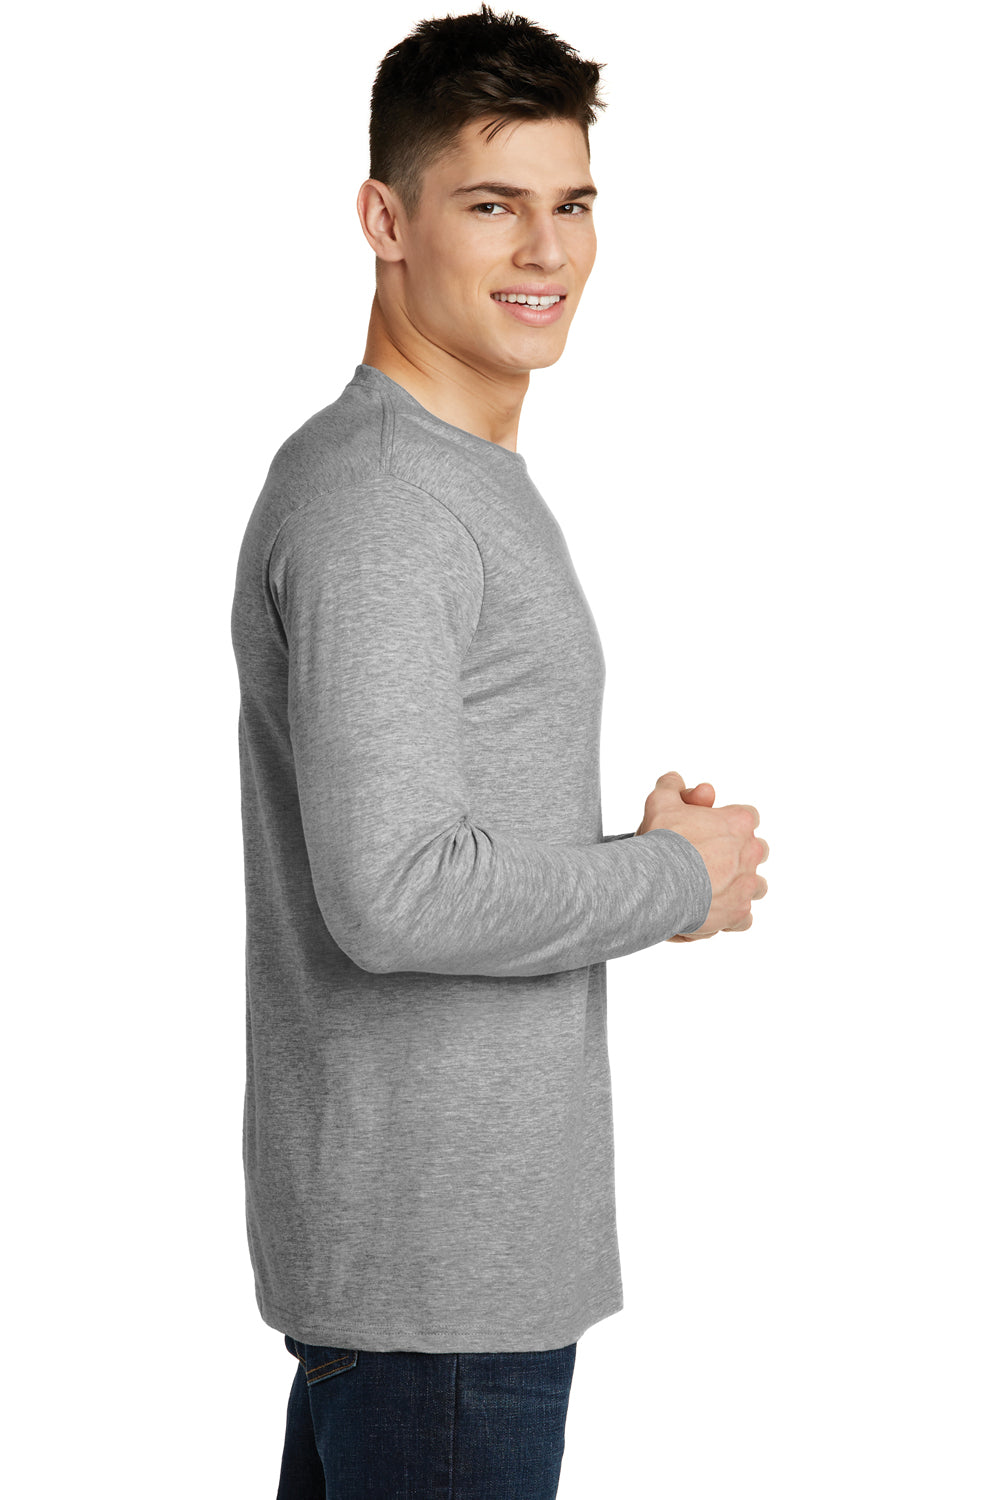 District DT6200 Mens Very Important Long Sleeve Crewneck T-Shirt Heather Light Grey Side